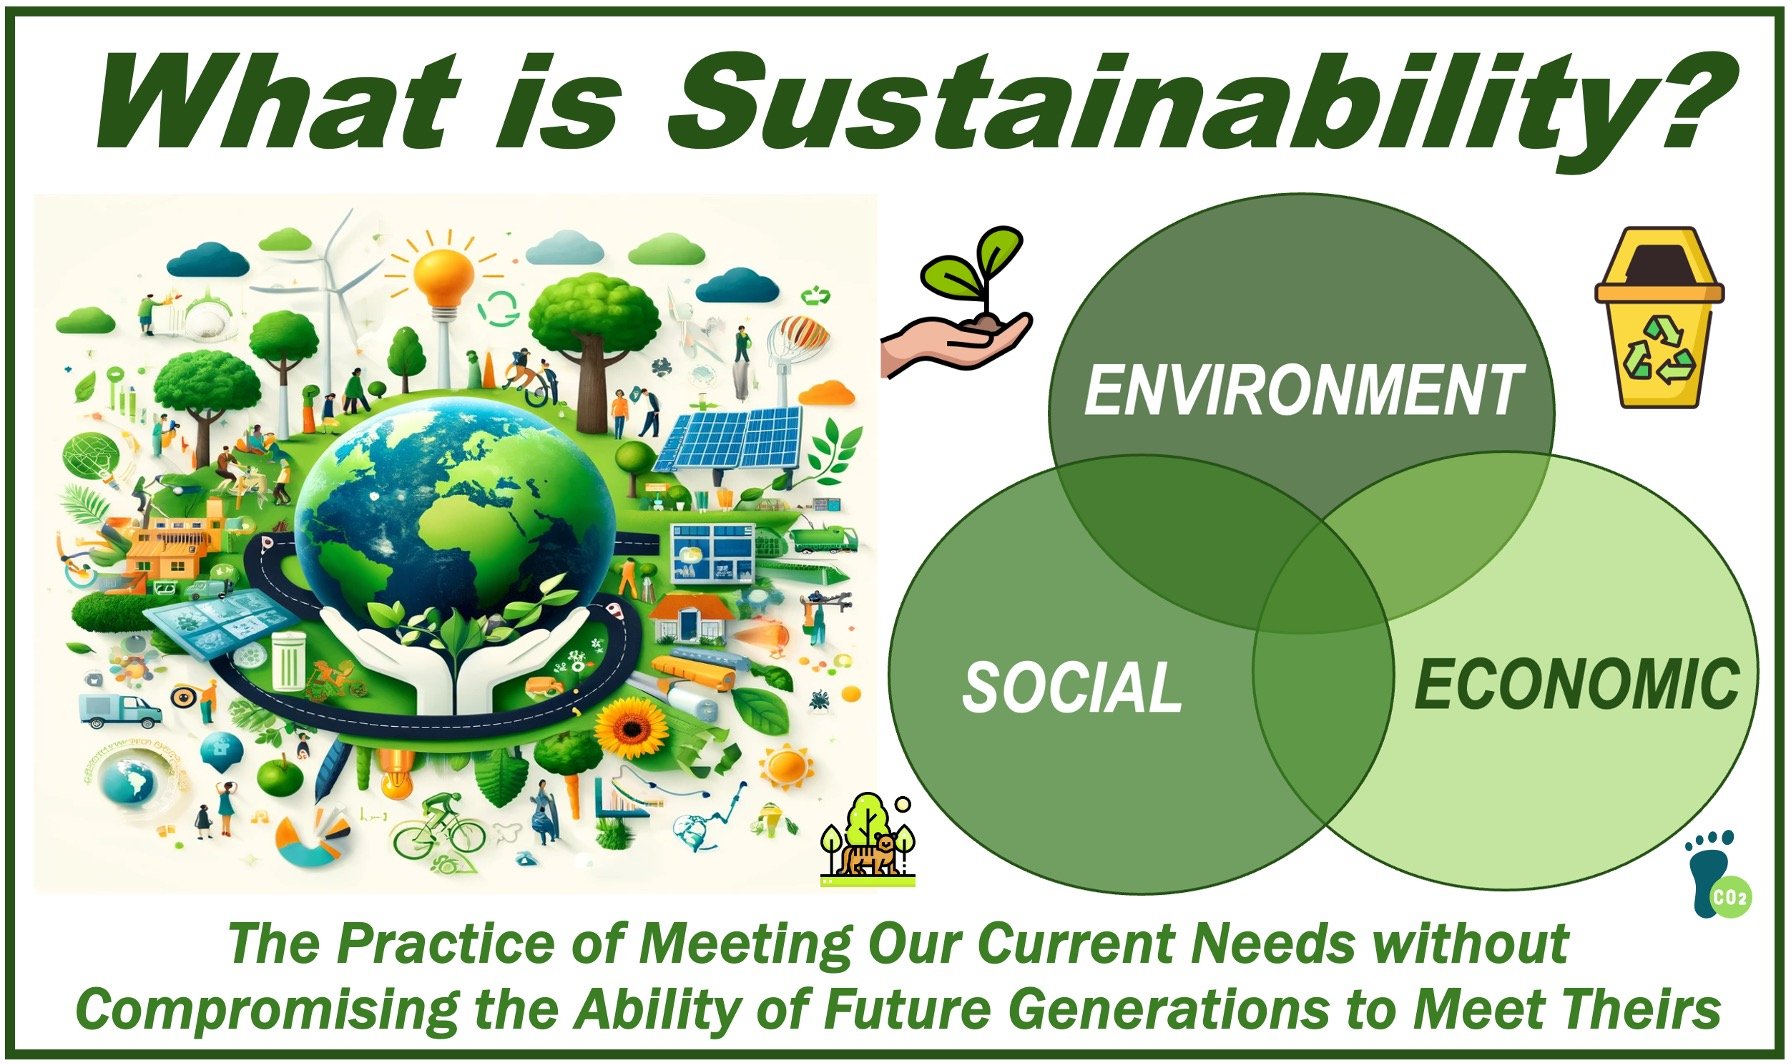 Planet Earth and various ecological components, renewable energy sources, and a definition of Sustainability.